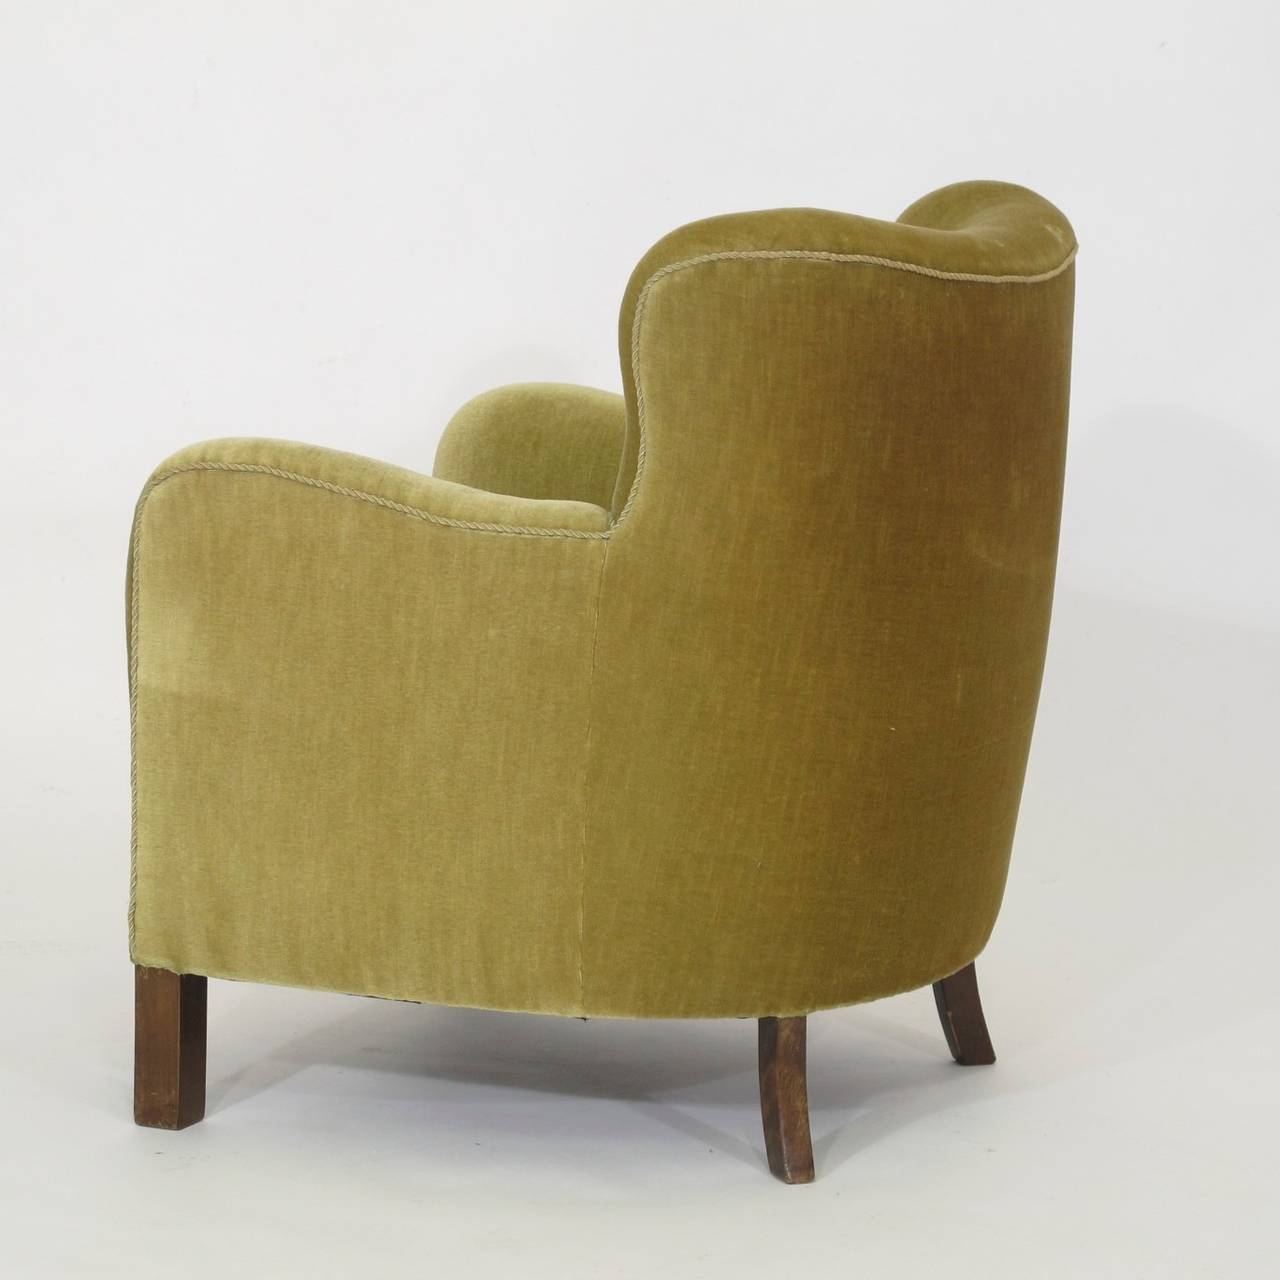 Hand-Crafted 1930s AJ Iversen Danish Deco Club Chair